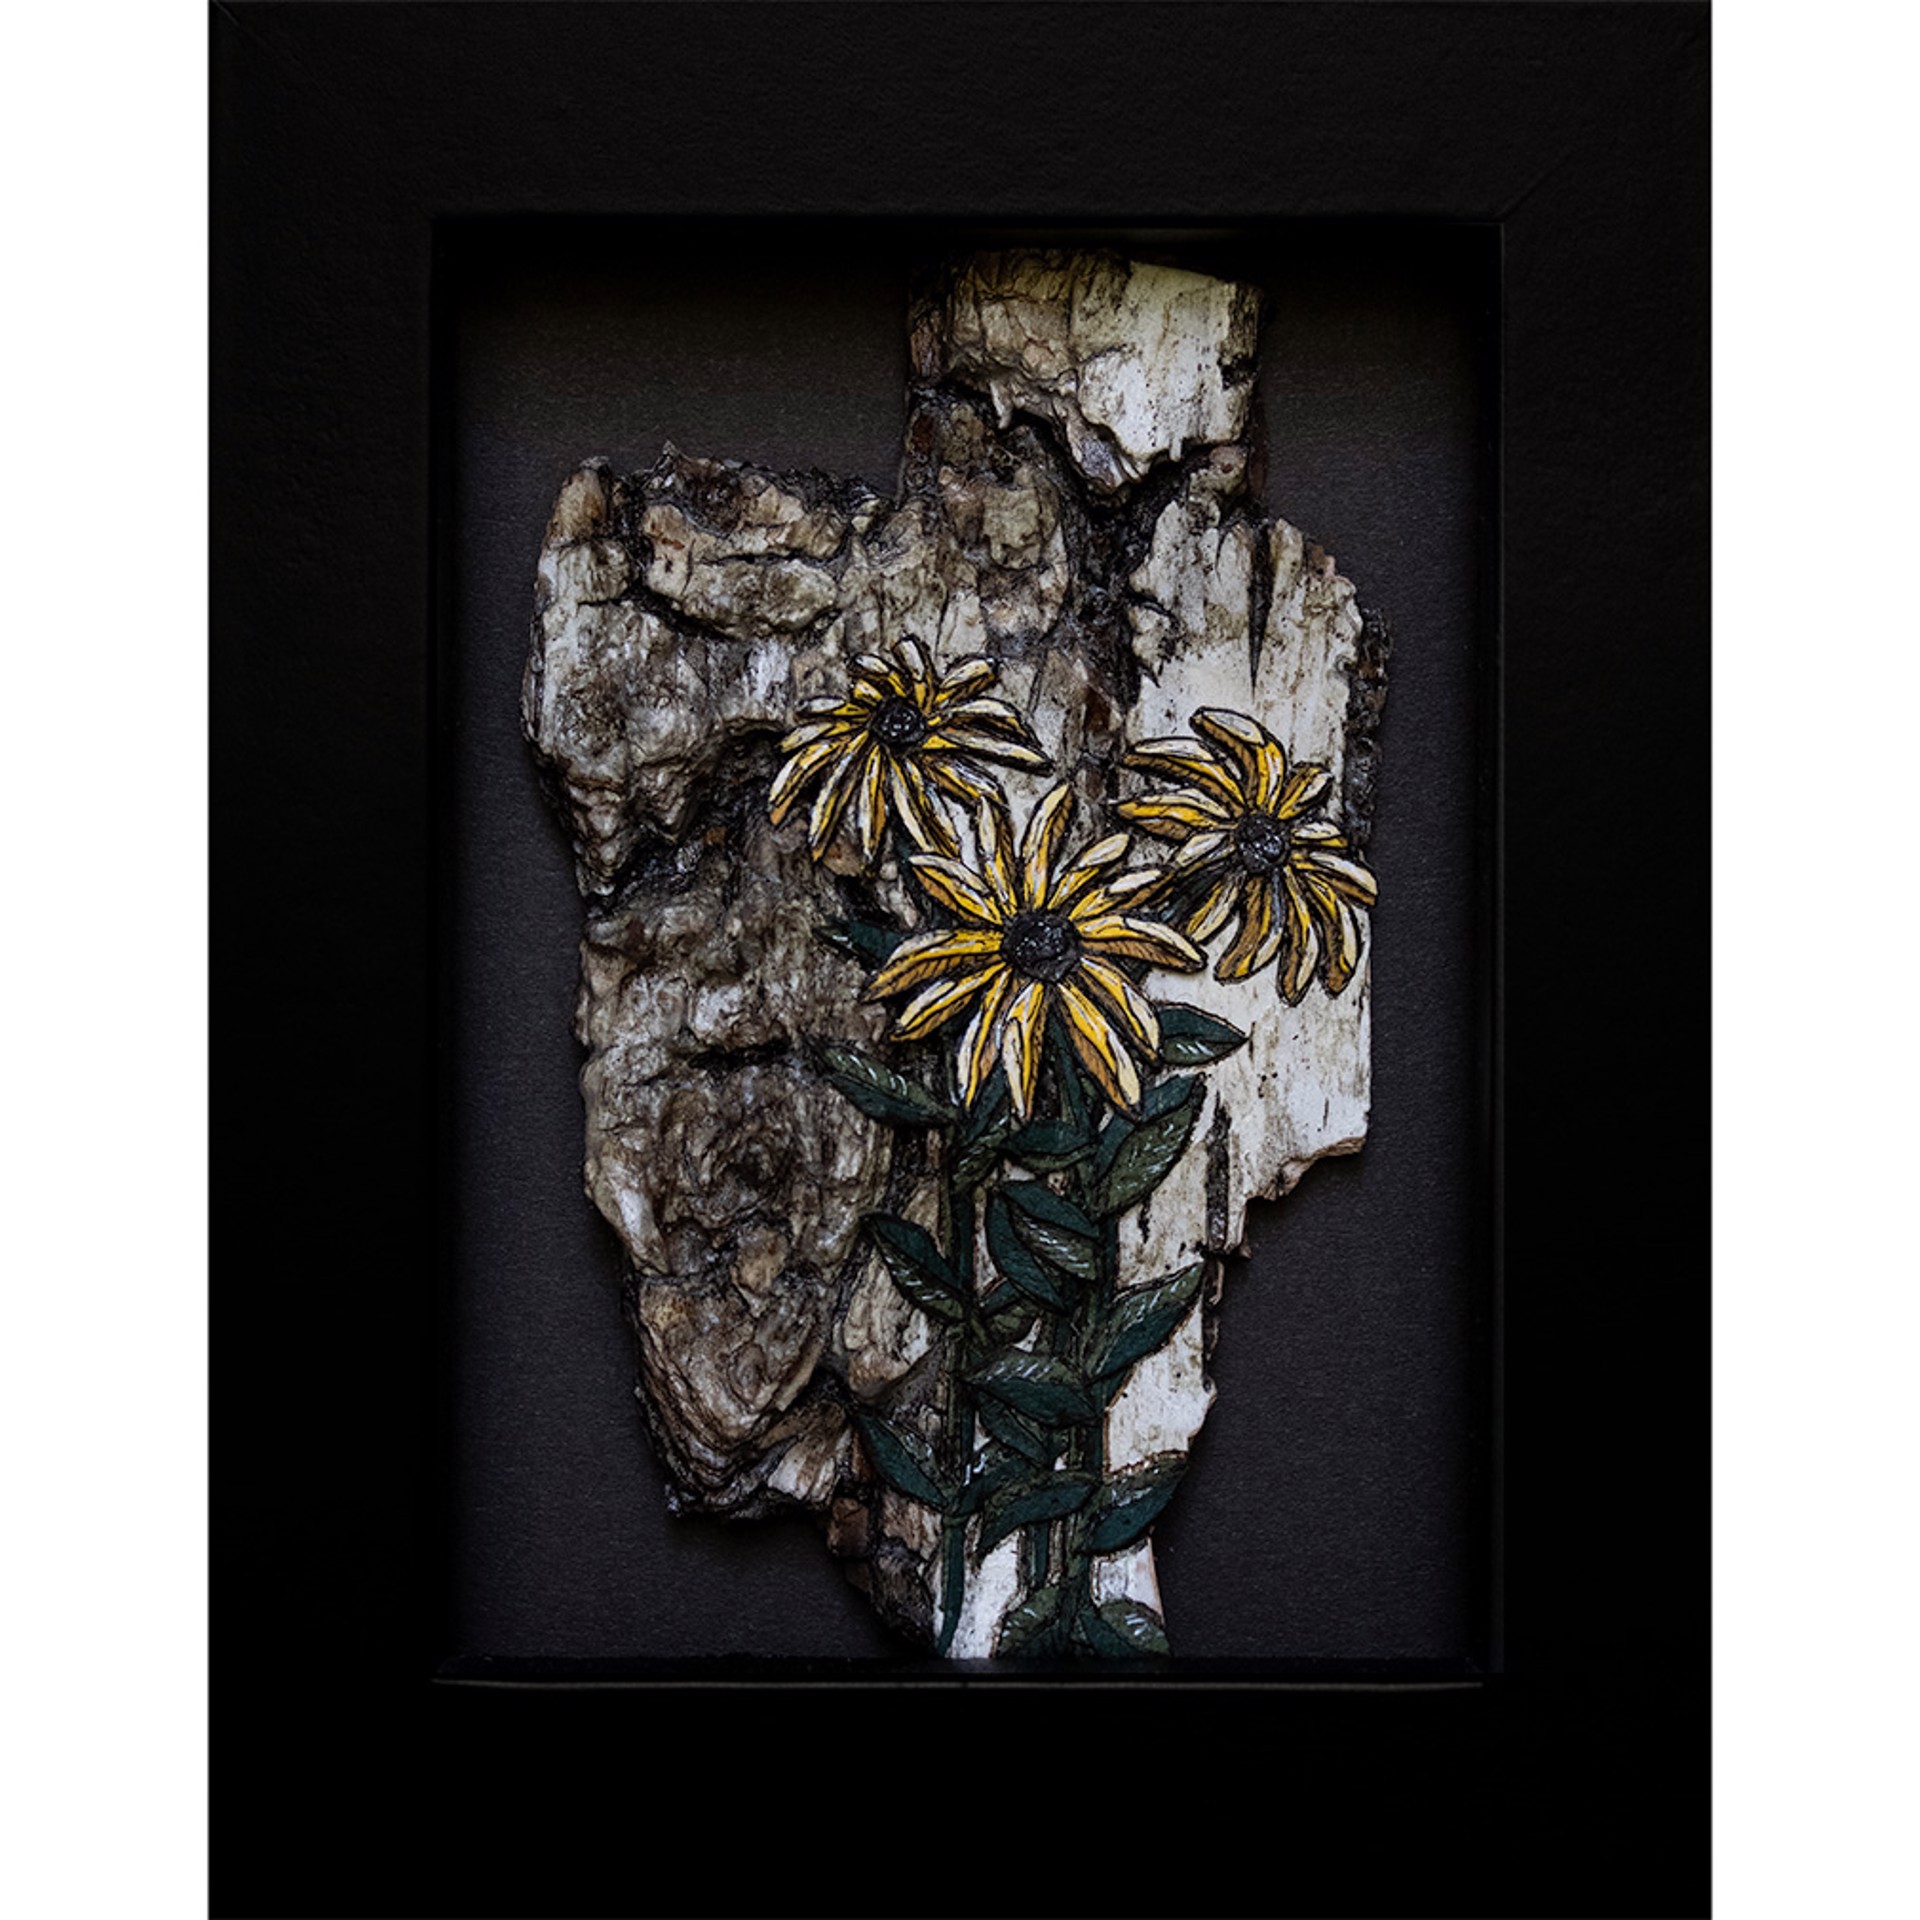 Black-Eyed Susans (Collage) by Willow Bayer